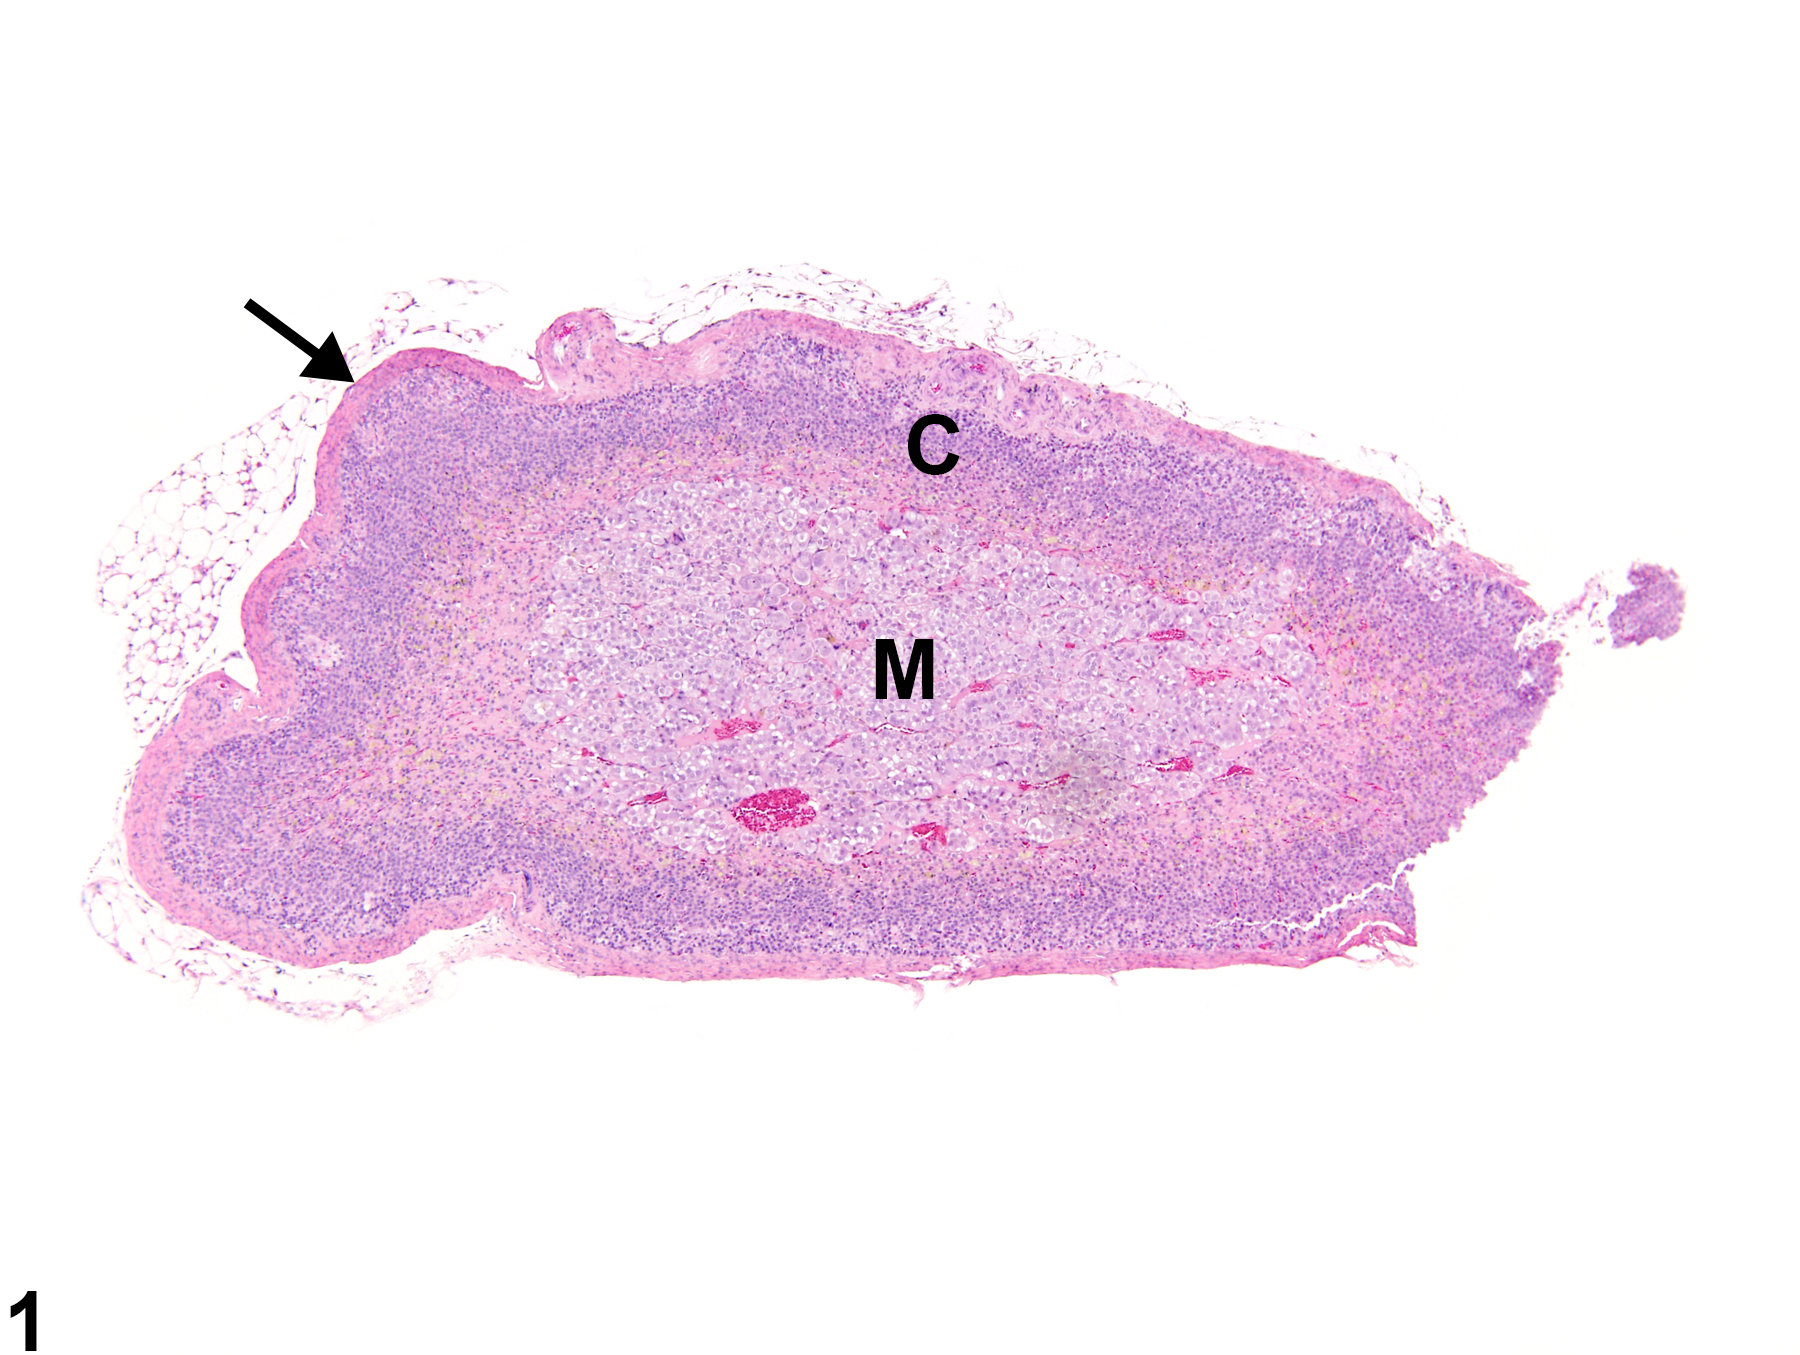 Image of atrophy in the adrenal gland cortex from a female Sprague-Dawley rat in a chronic study